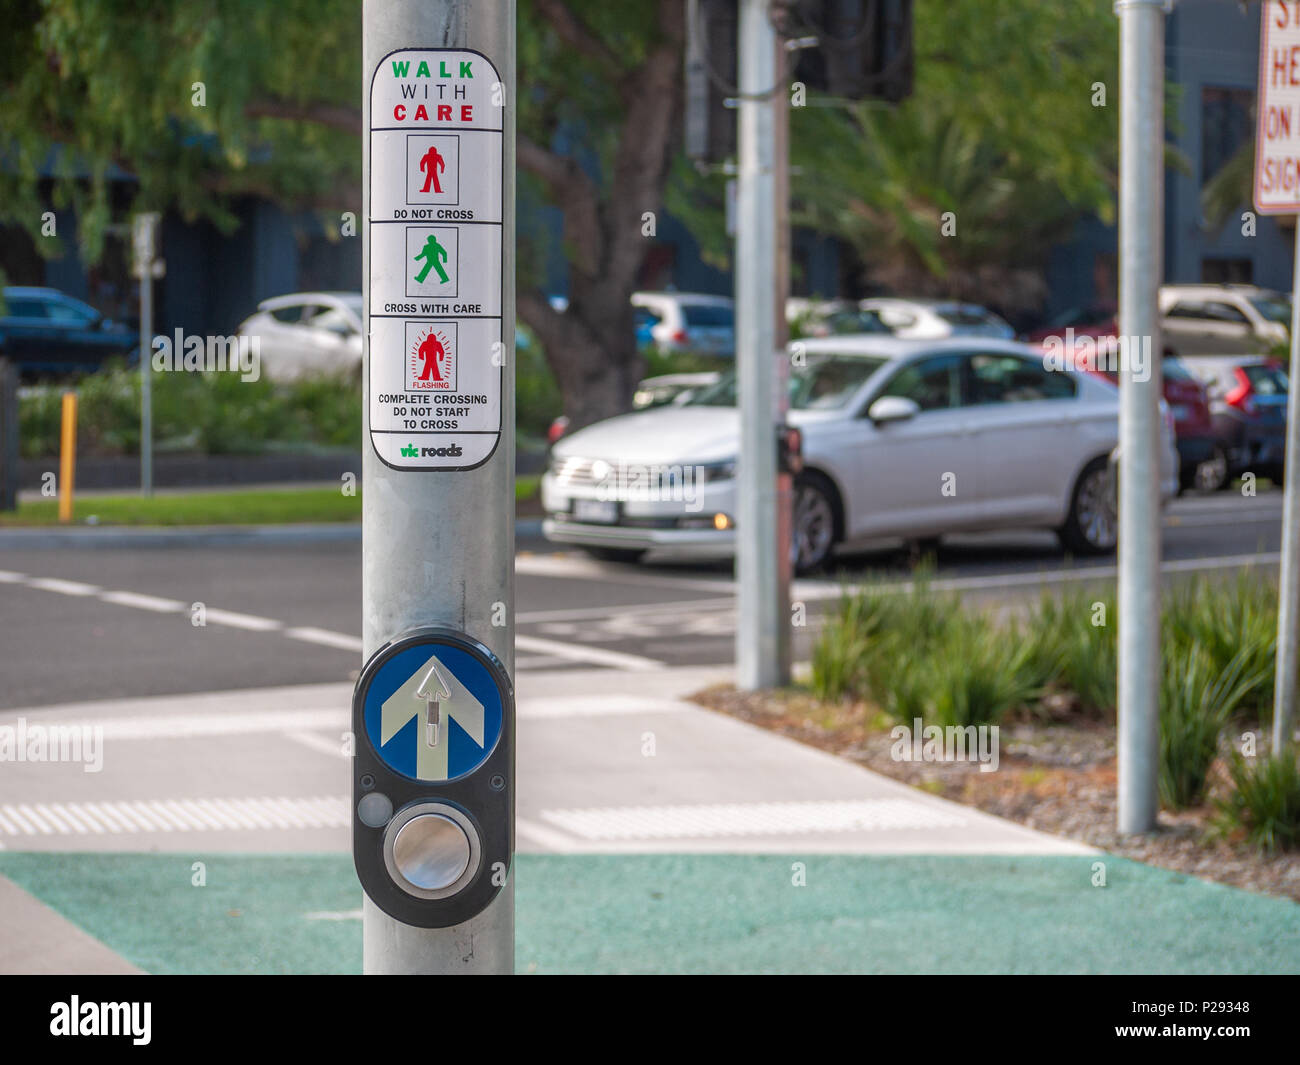 Pedestrian crossing button with car waiting at traffic lights as background on Melbourne's suburban street . Footscray, VIC Australia Stock Photo